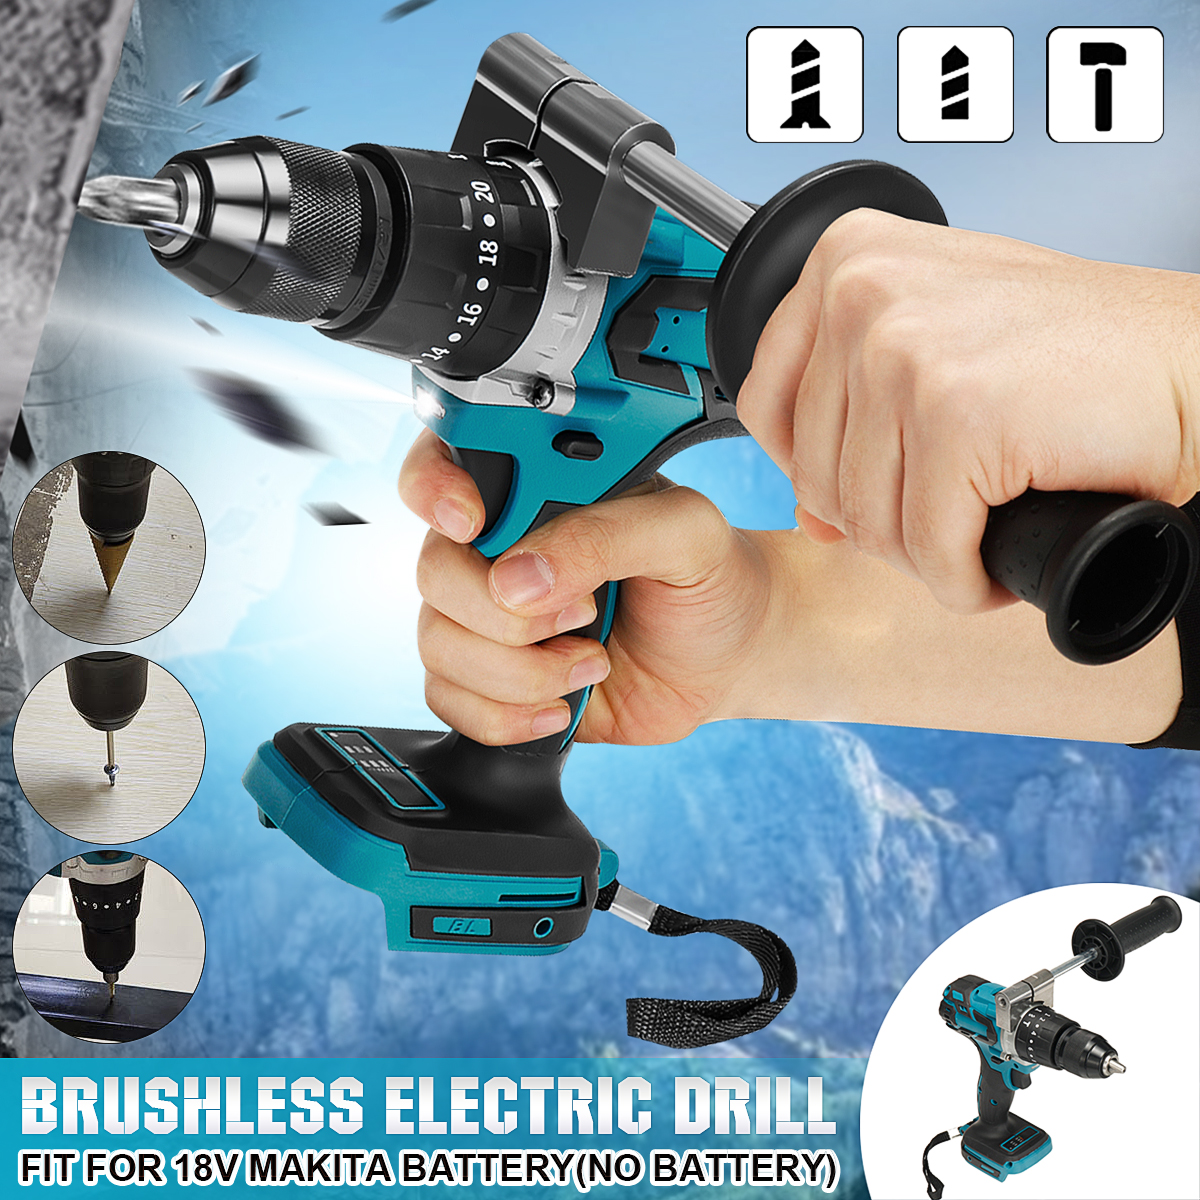 Brushless-Electric-Drill-20-Torque-520NM-Cordless-Screwdriver-13mm-Chuck-Power-Drill-for-Makita-18V--1801609-2